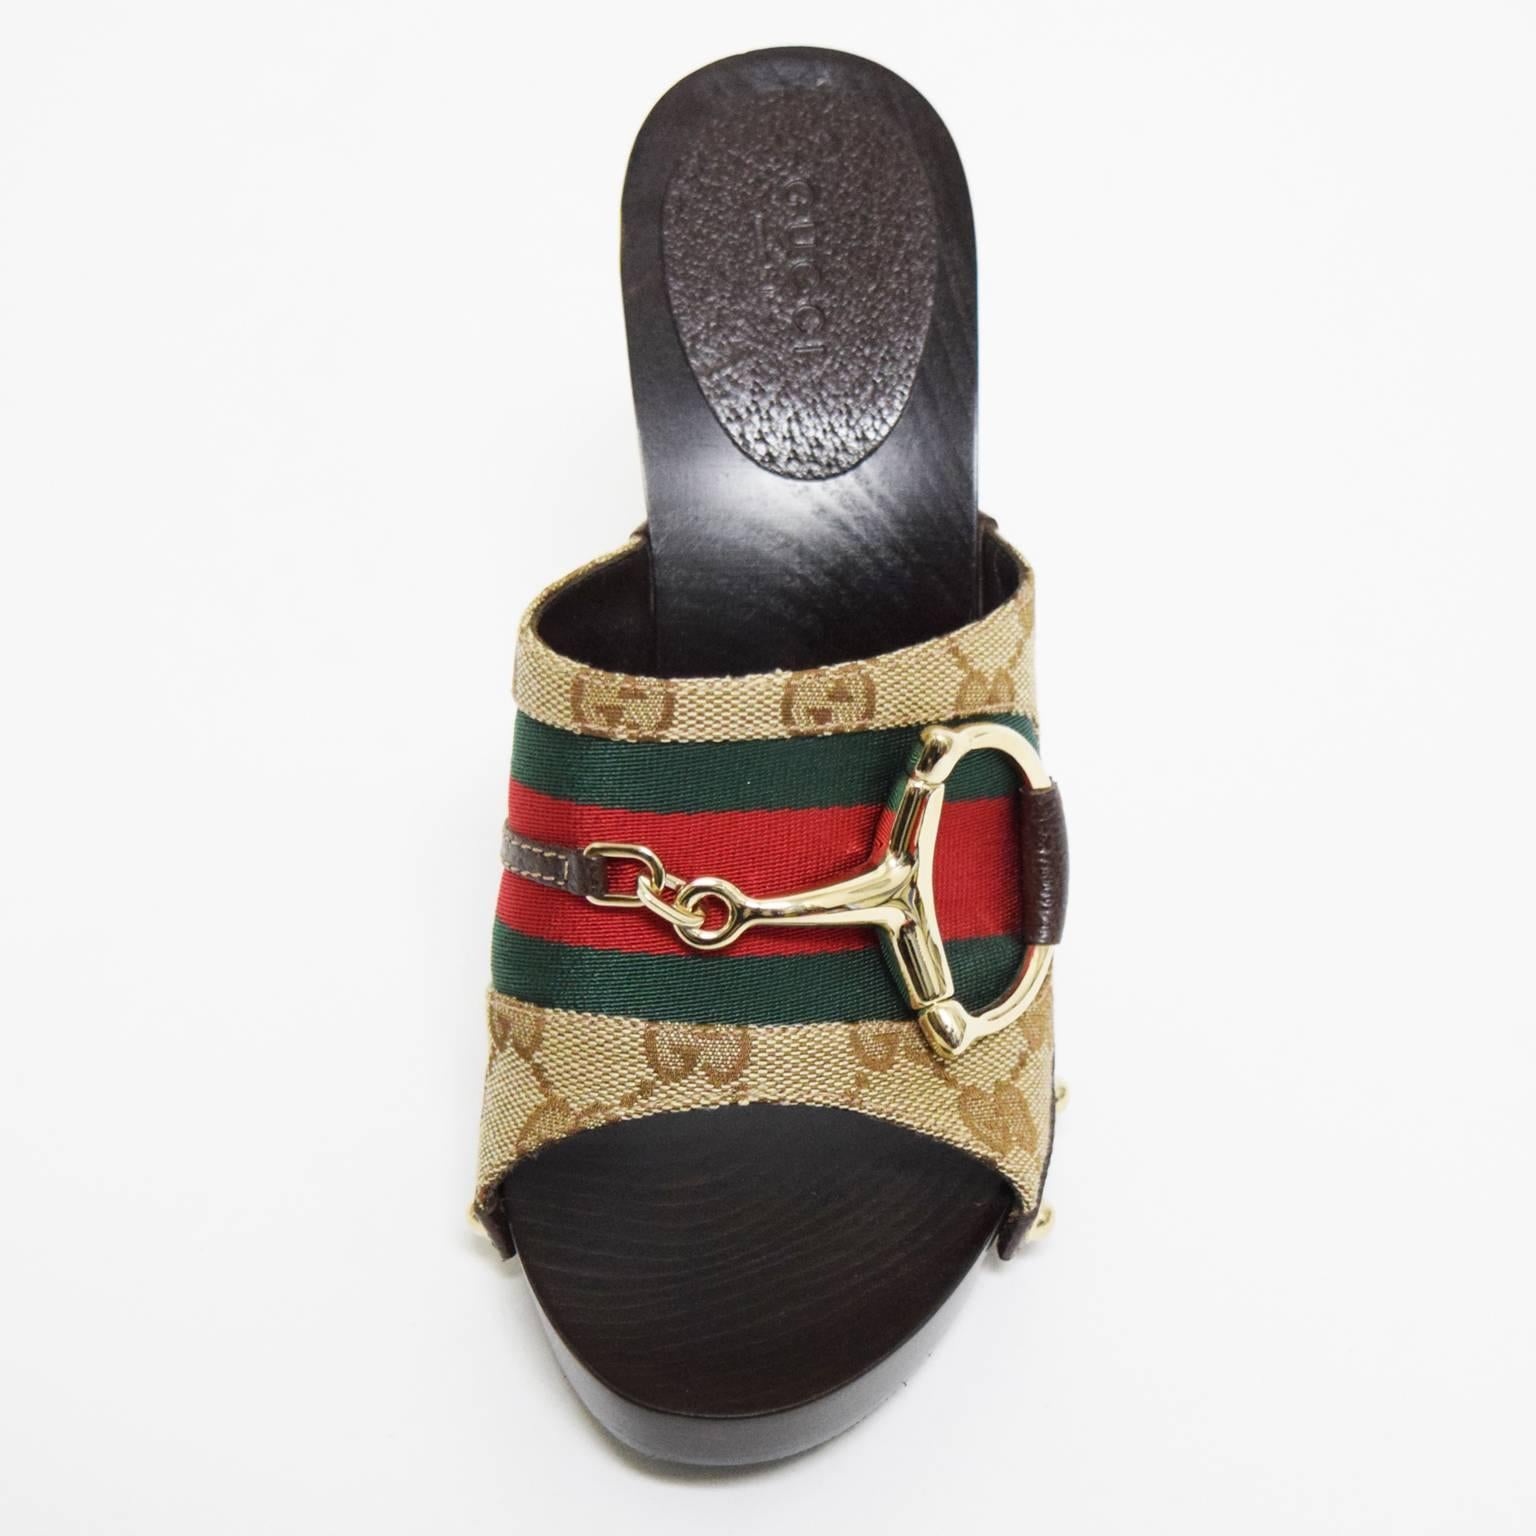 This appealing mules by Gucci have a dark wooden sole, canvas covered leather upper with original Gucci print and signature green and red striped detail. There is a gold metal buckle located on the upper as well and gold metal grommets on both sides